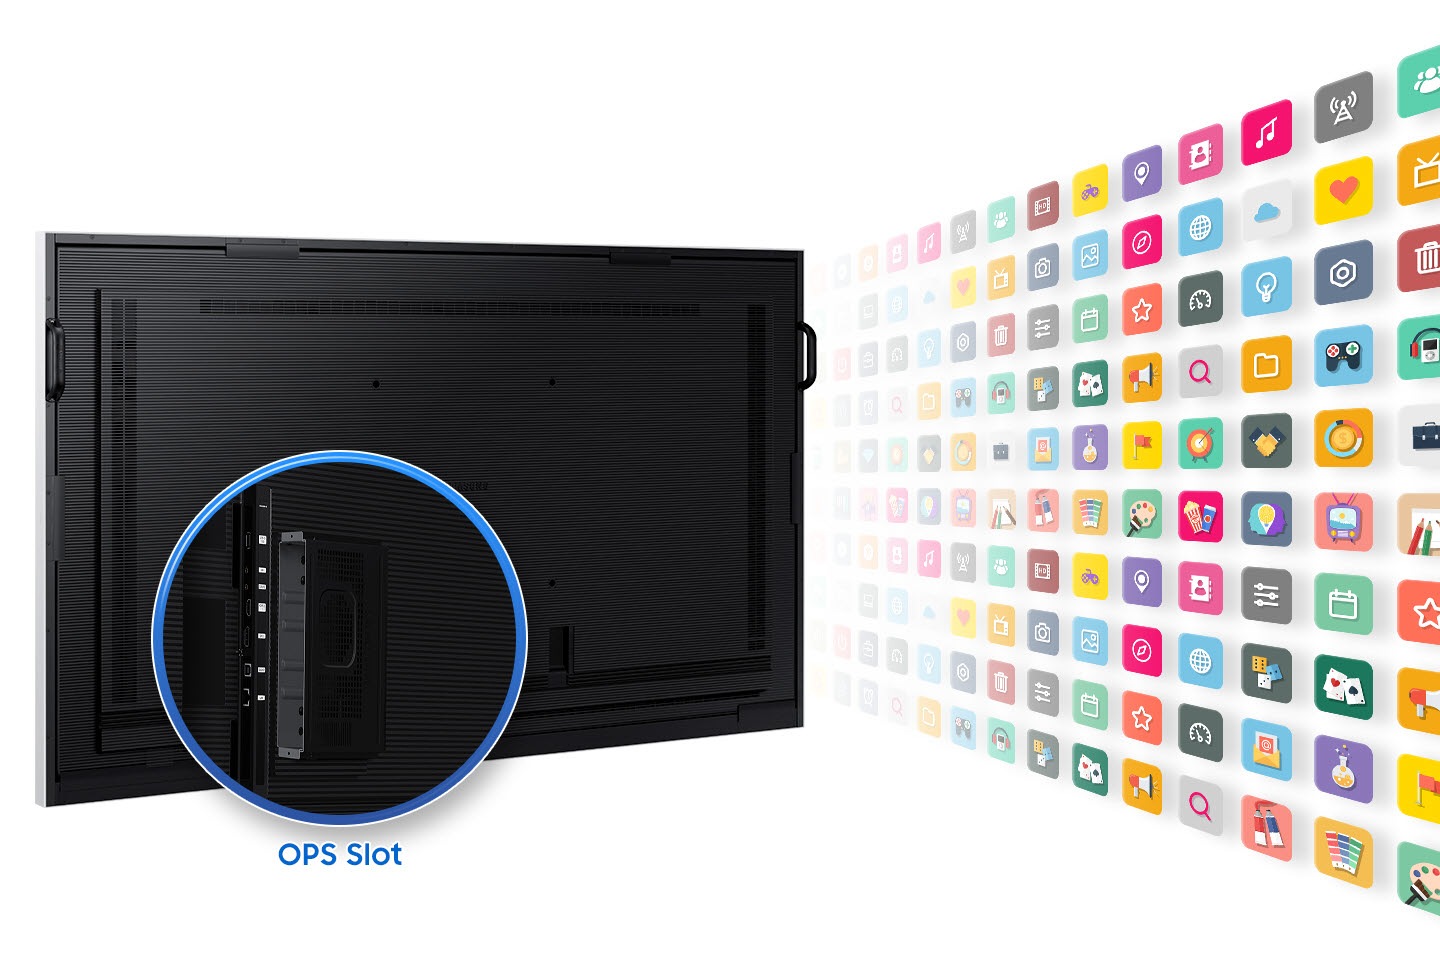 The OPS Slot located on the back of the Flip Pro is enlarged and displayed. On the right, a number of app icons available through OPS are listed.